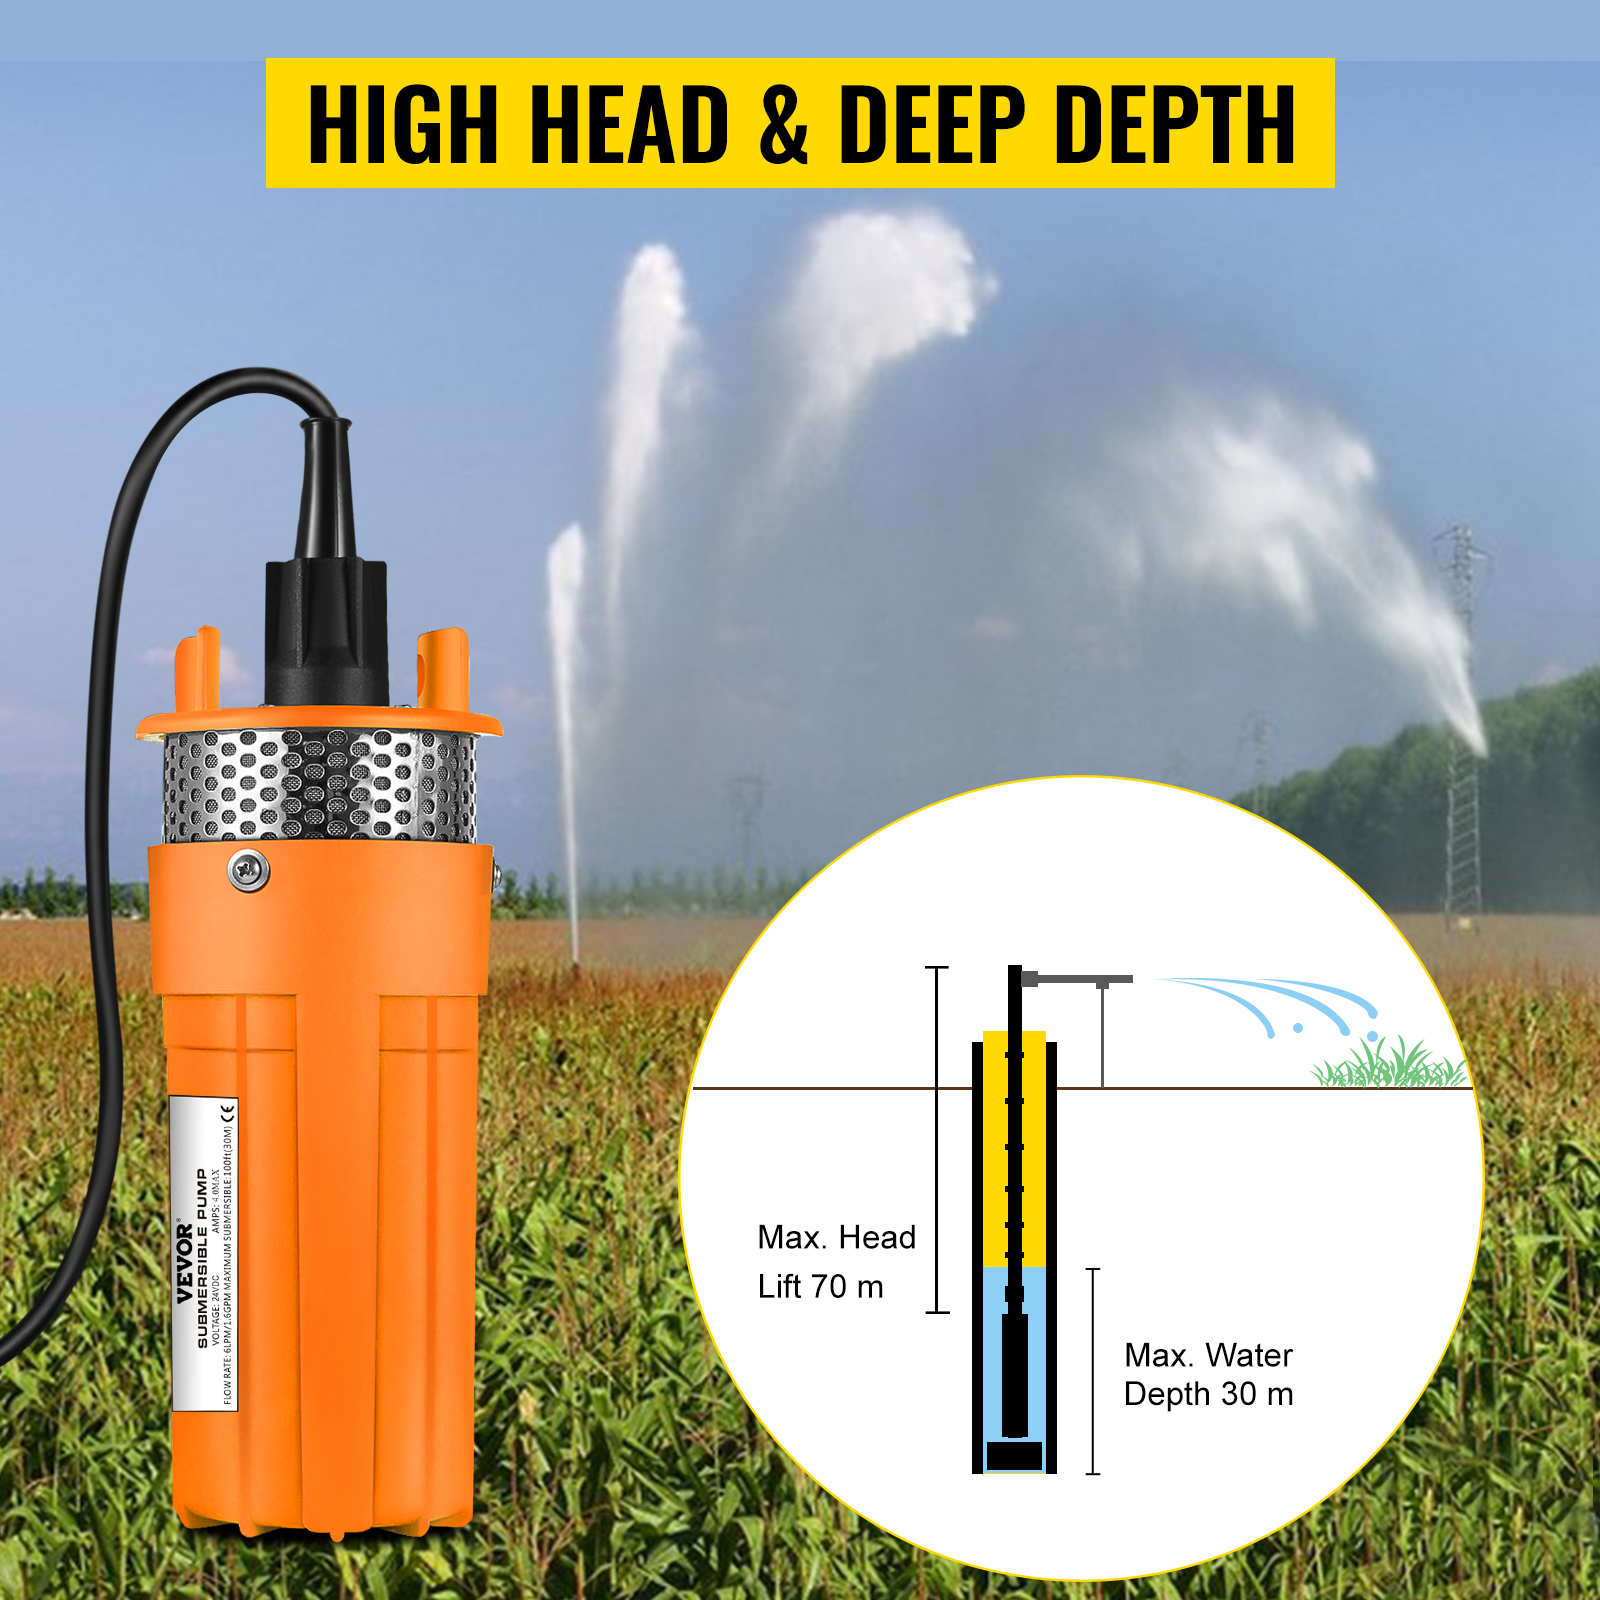 24V DC Solar Powered Deep Submersible Water Well Pump Farm Ranch Household